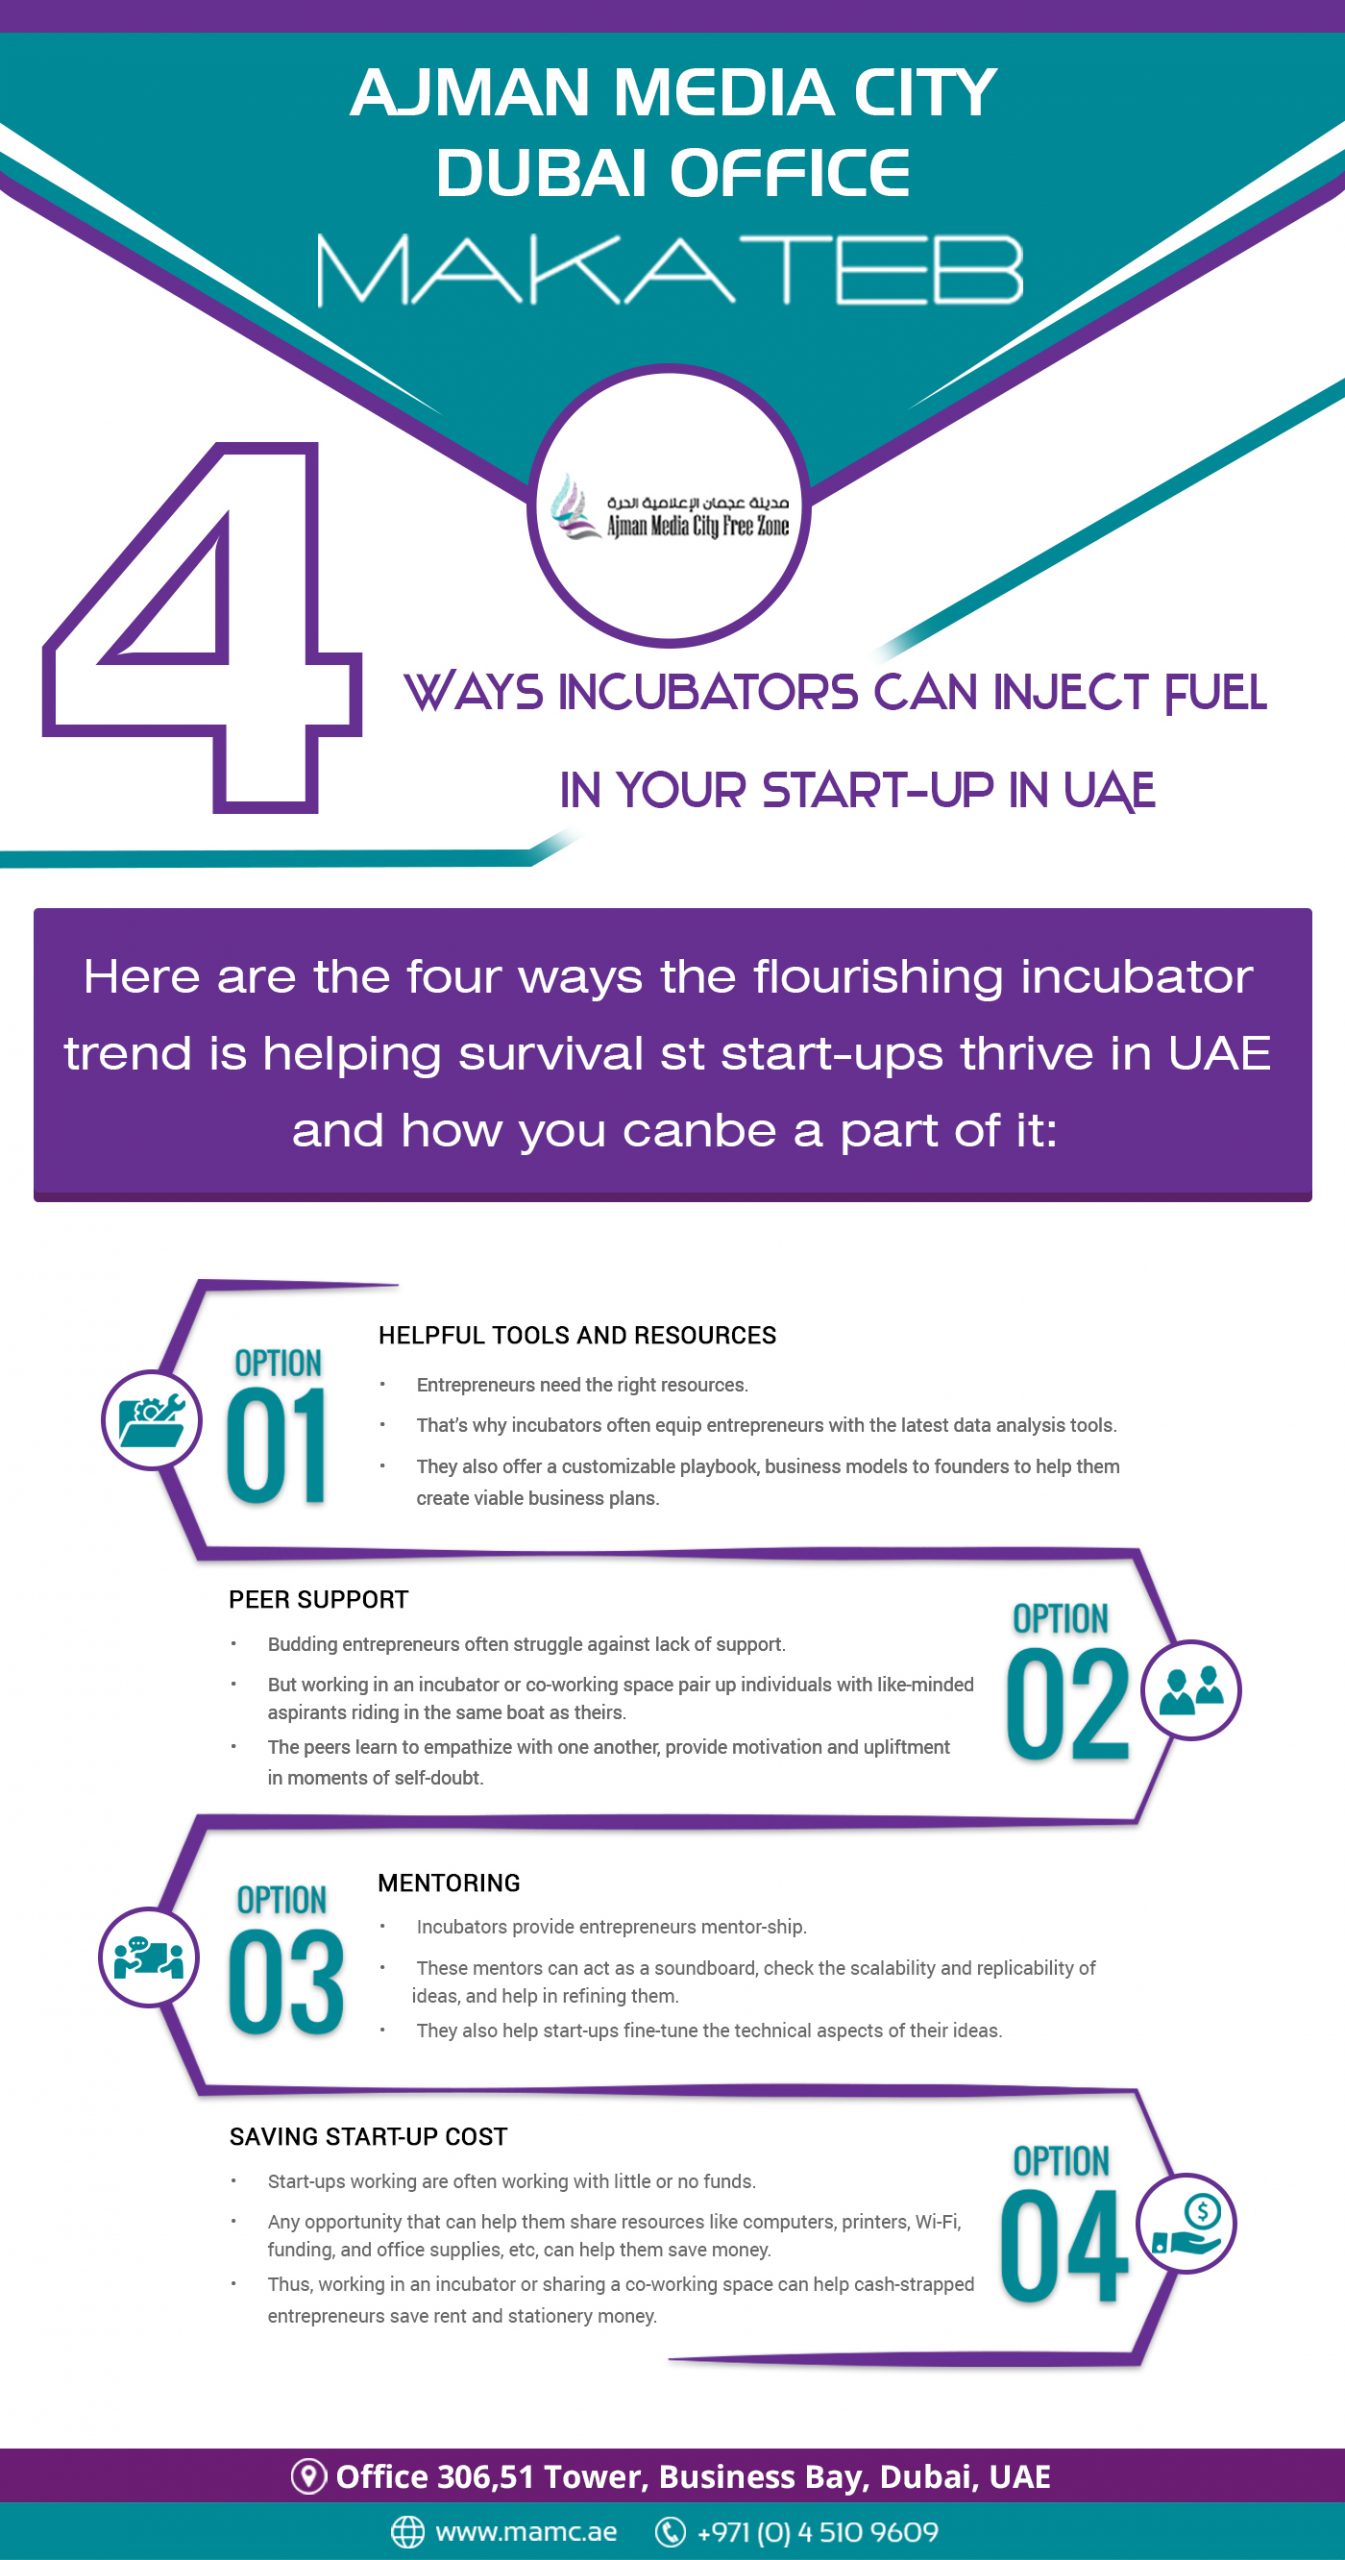 Ways incubators can inject fuel in your start up in UAE